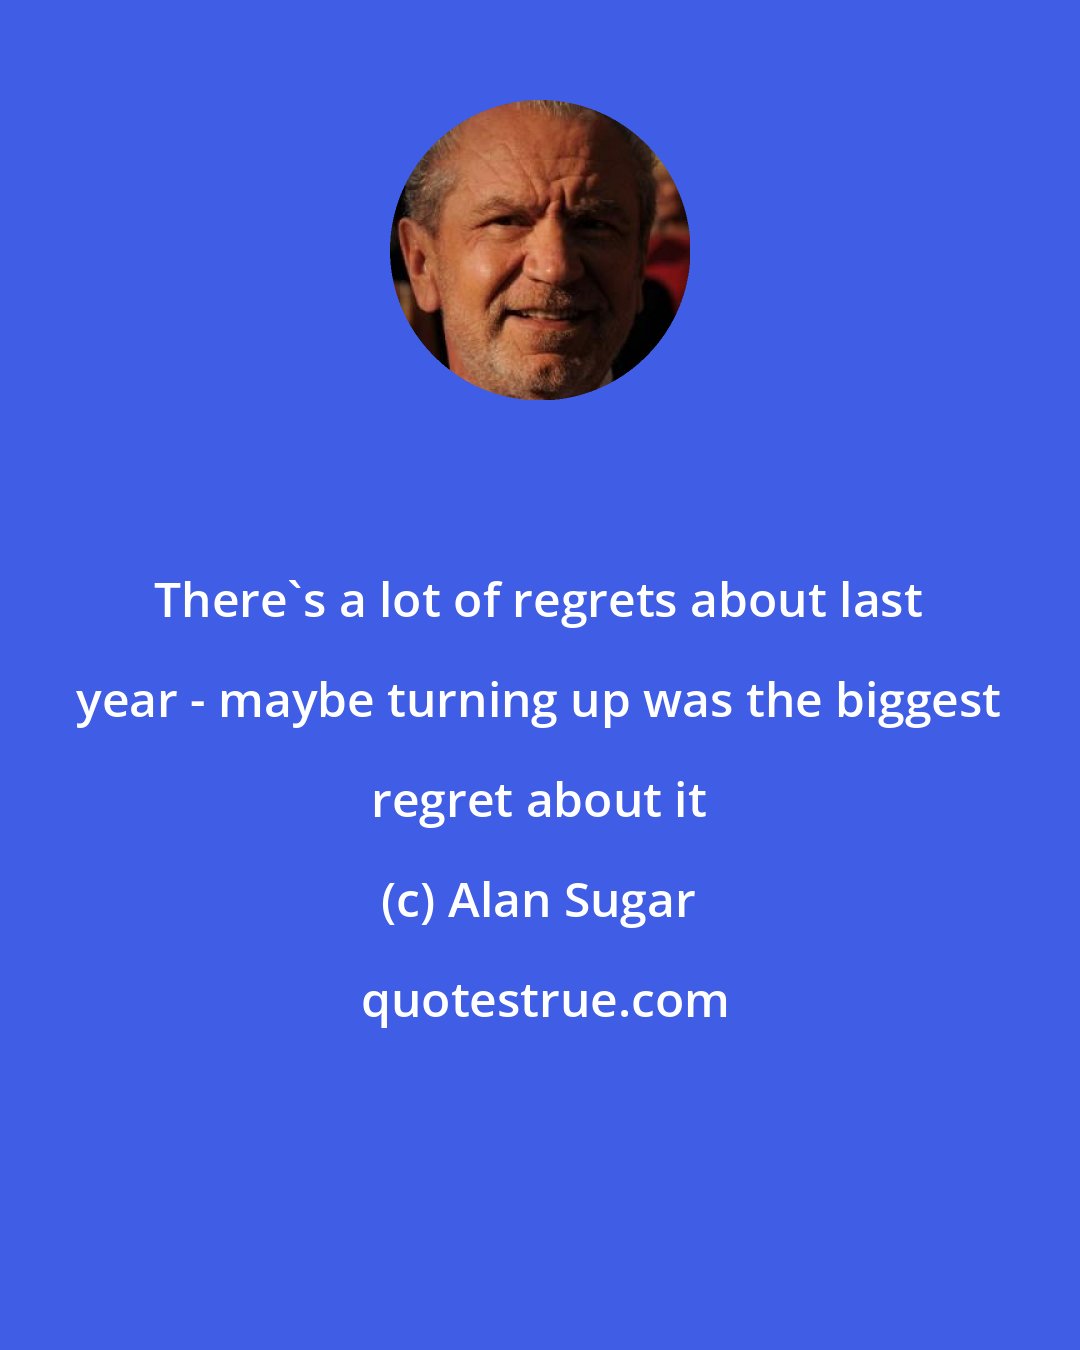 Alan Sugar: There's a lot of regrets about last year - maybe turning up was the biggest regret about it